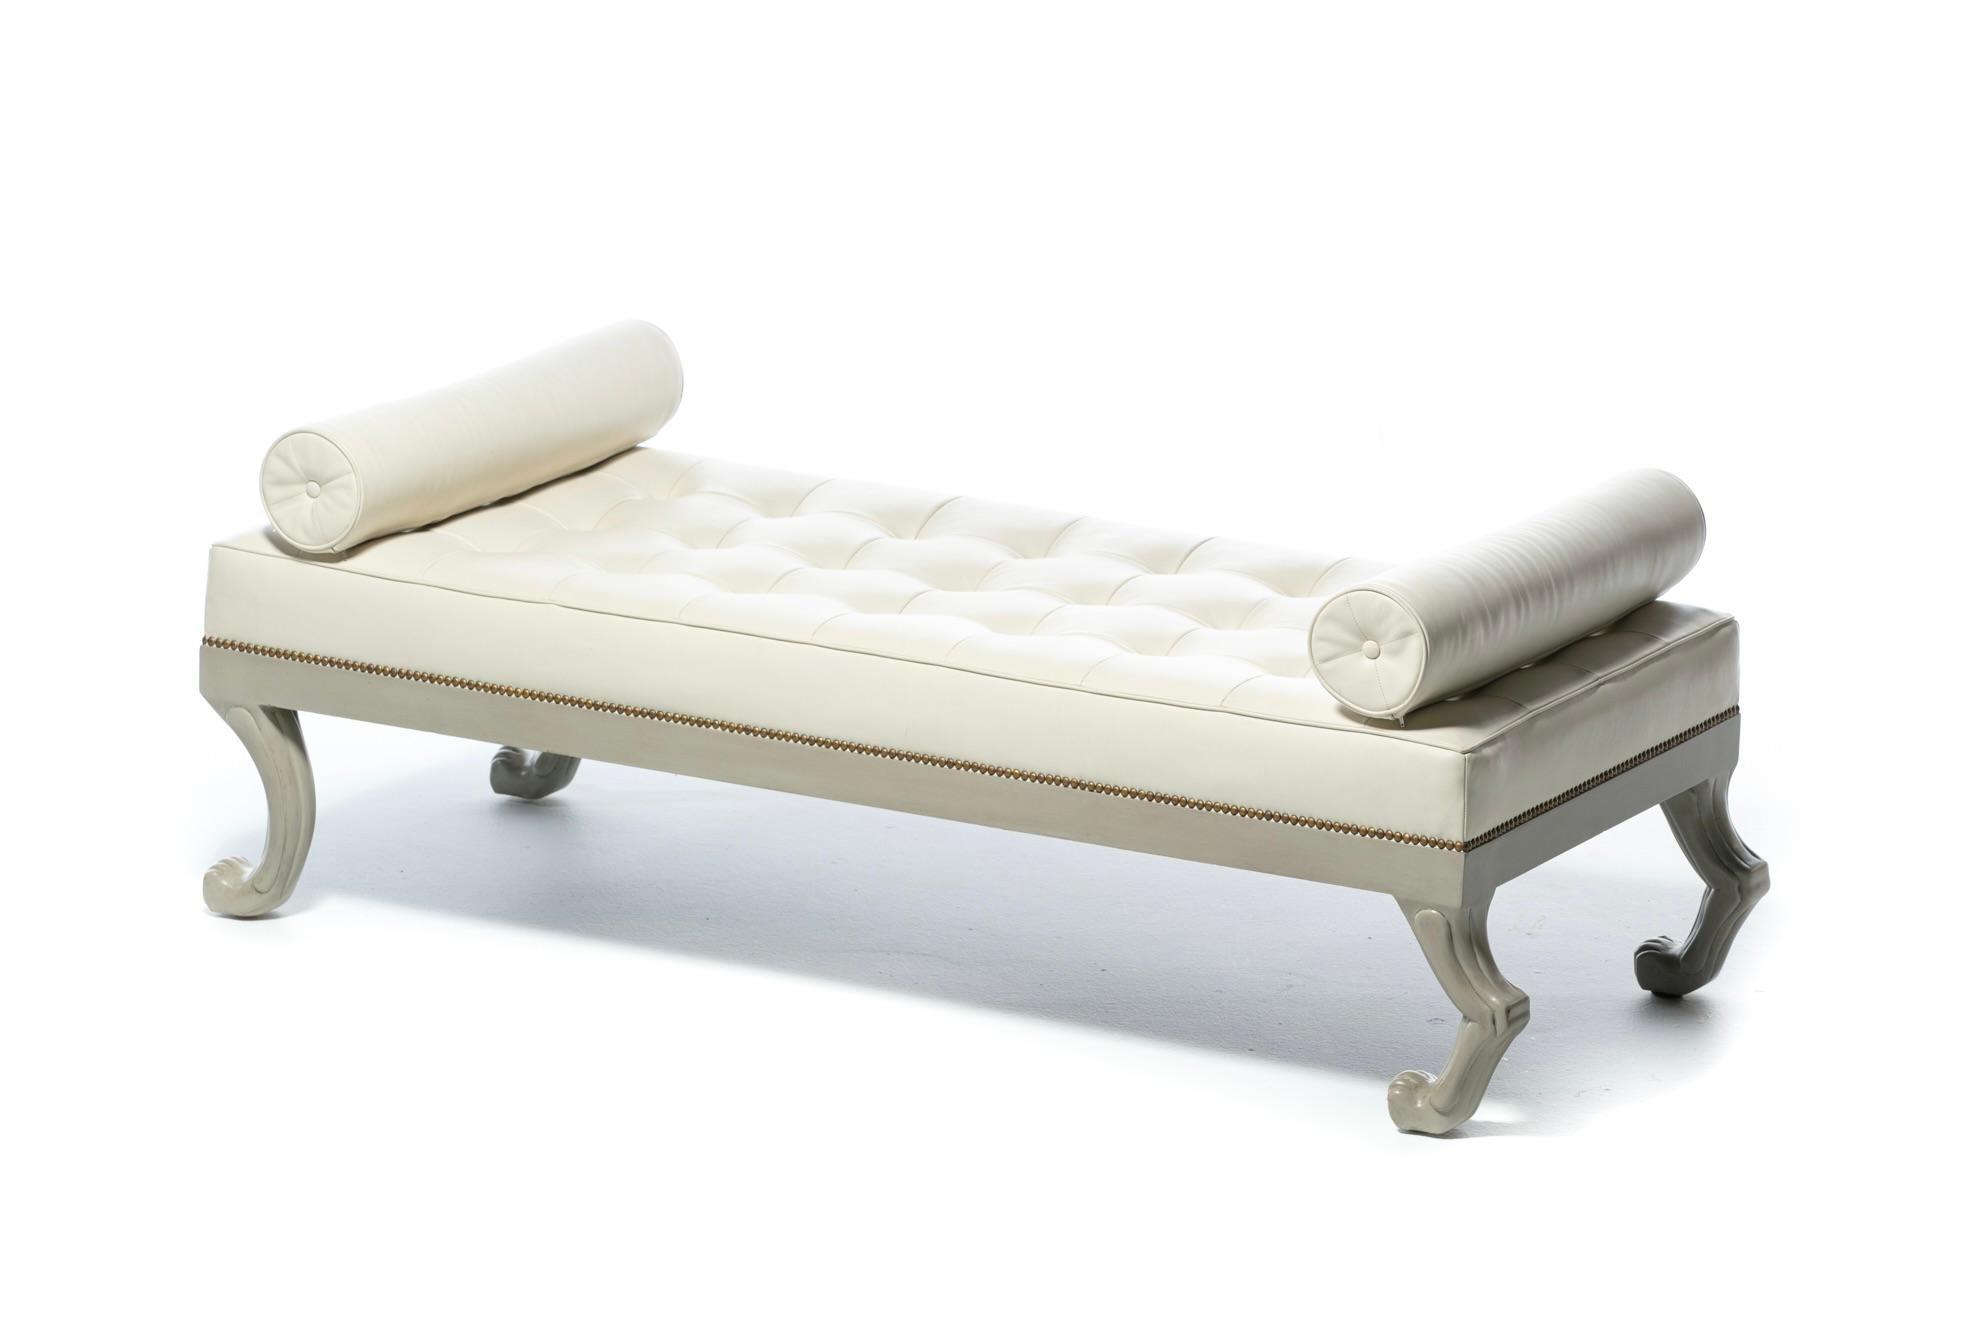 Elegant and whimsical French style Neoclassical Daybed upholstered in tufted Ivory White Leather with matching magnetic stationary Bolster Pillows. Lots of details to admire. Leather squares are individually stitched and tufted for uniformity with